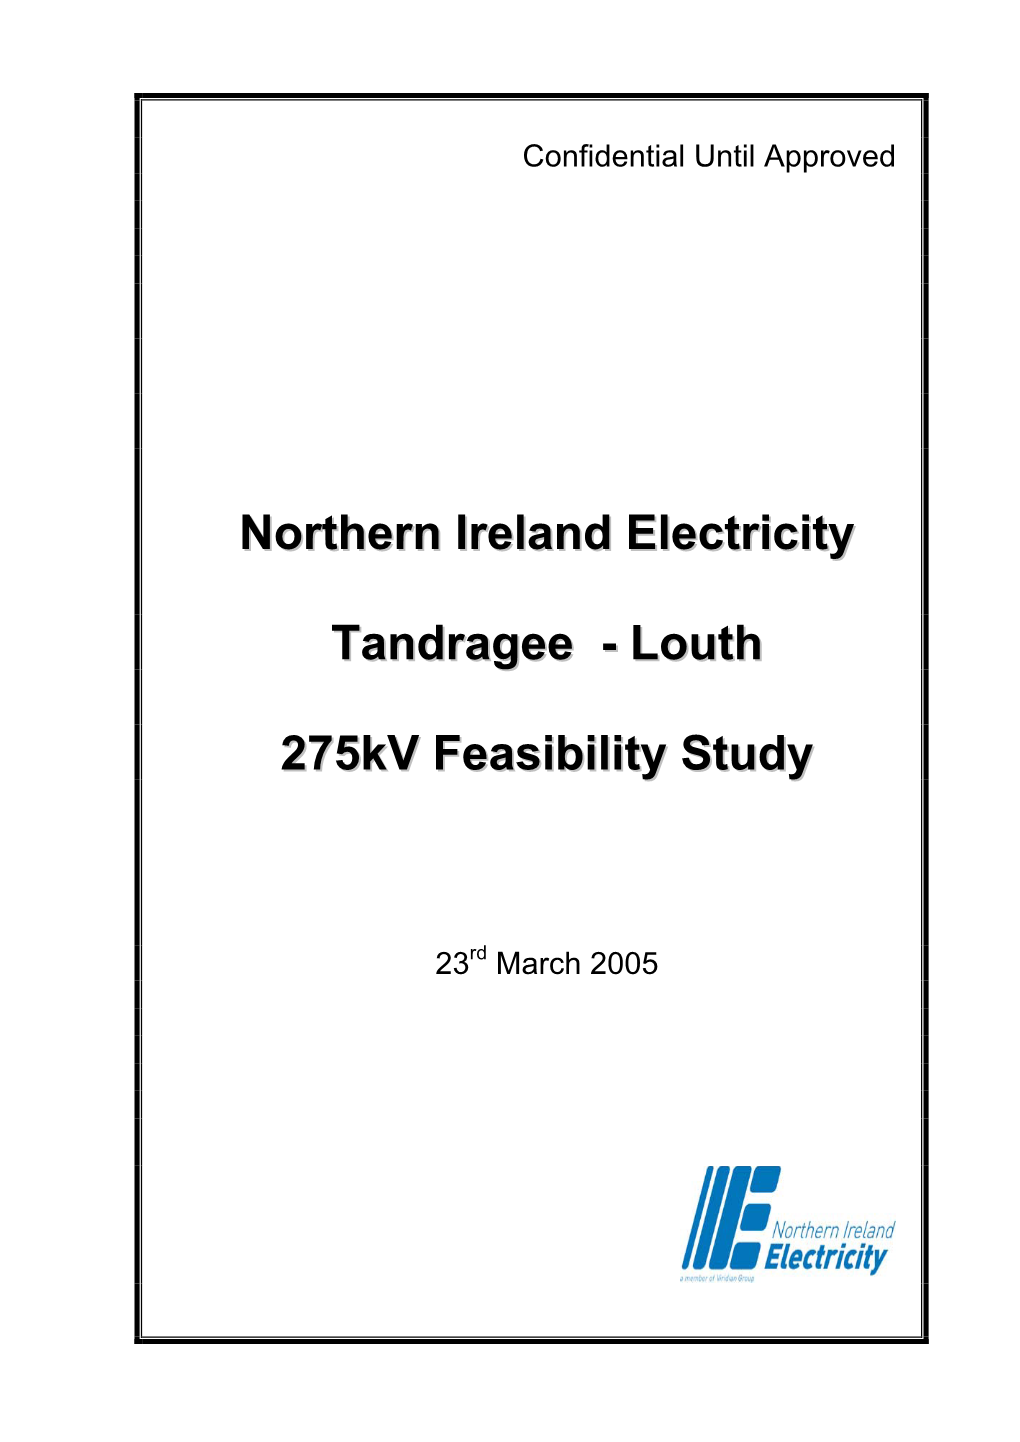 Northern Ireland Electricity Tandragee